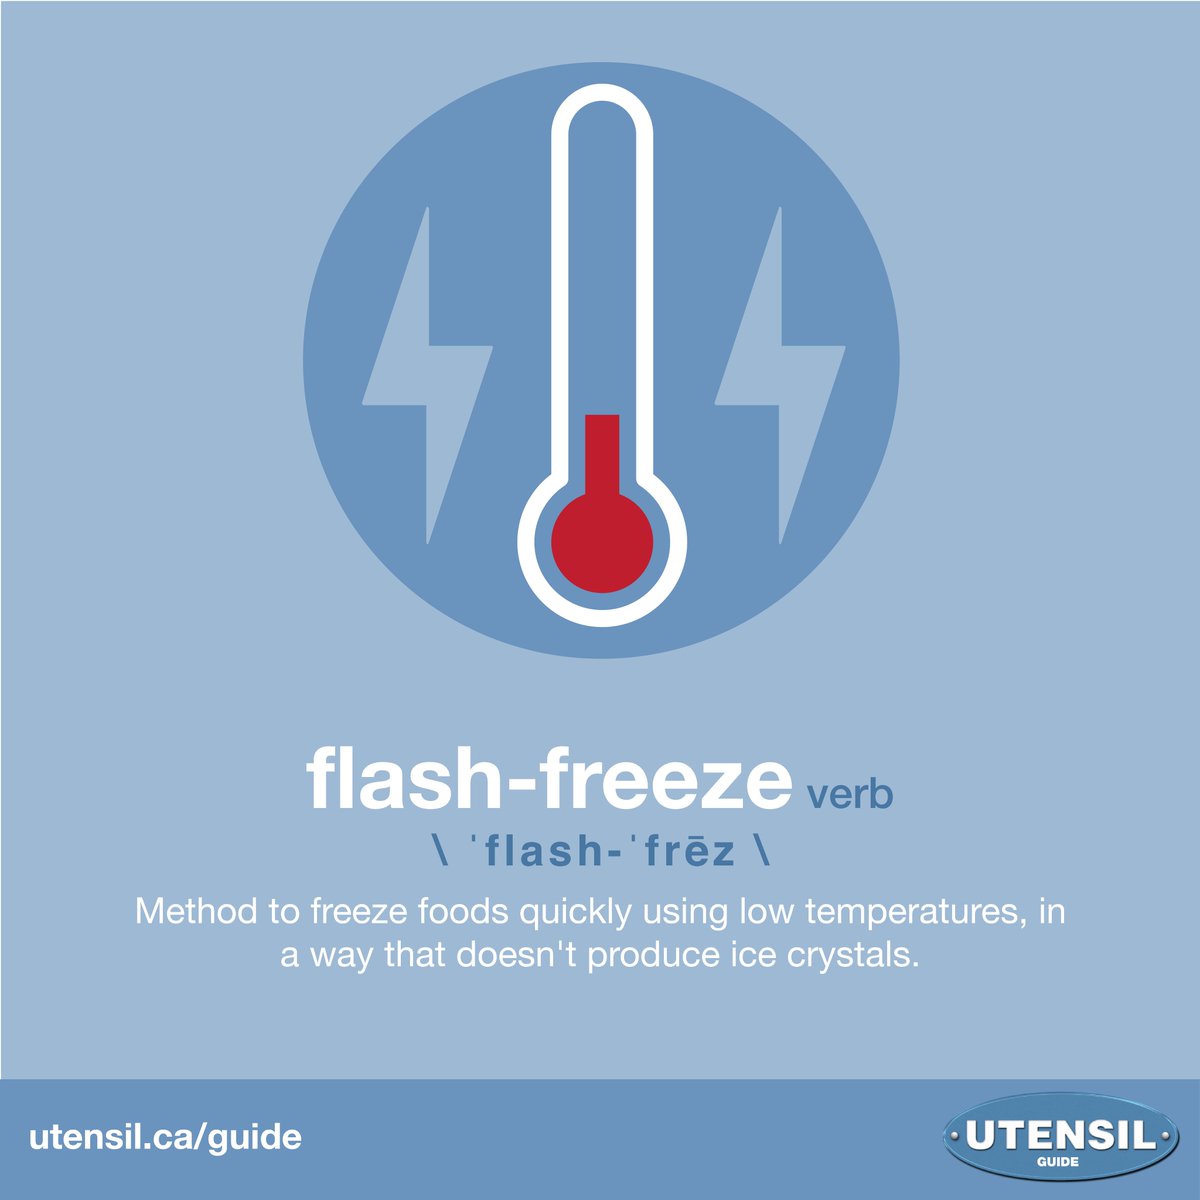 FLASH-FREEZE (verb) Method to freeze foods quickly using low temperatures, in a way that doesn’t produce ice crystals. #UtensilGuide #CdnAg #CdnFood Learn more food & farming terms at: utensil.ca/guide